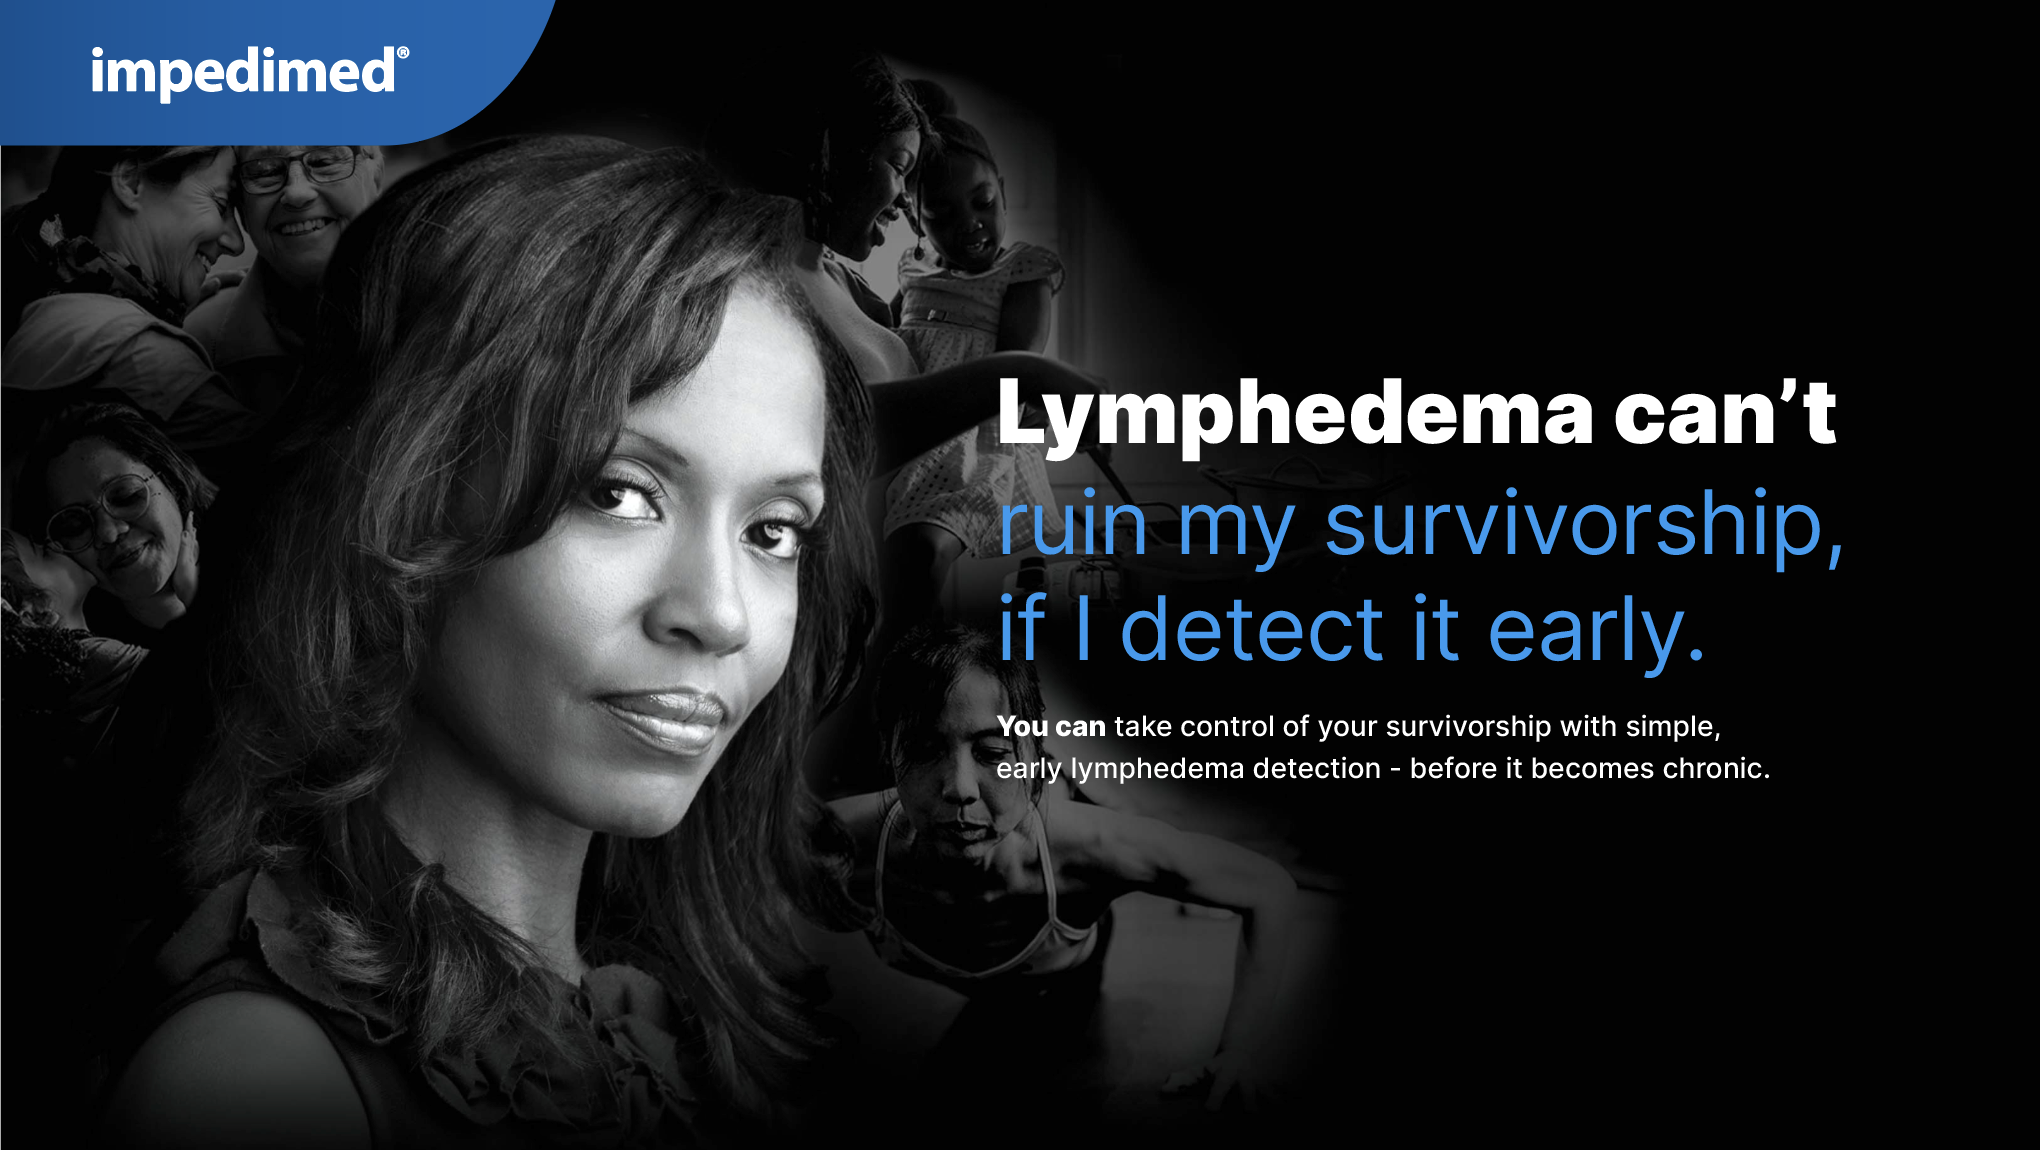 ImpediMed Lymphedema awareness campaign